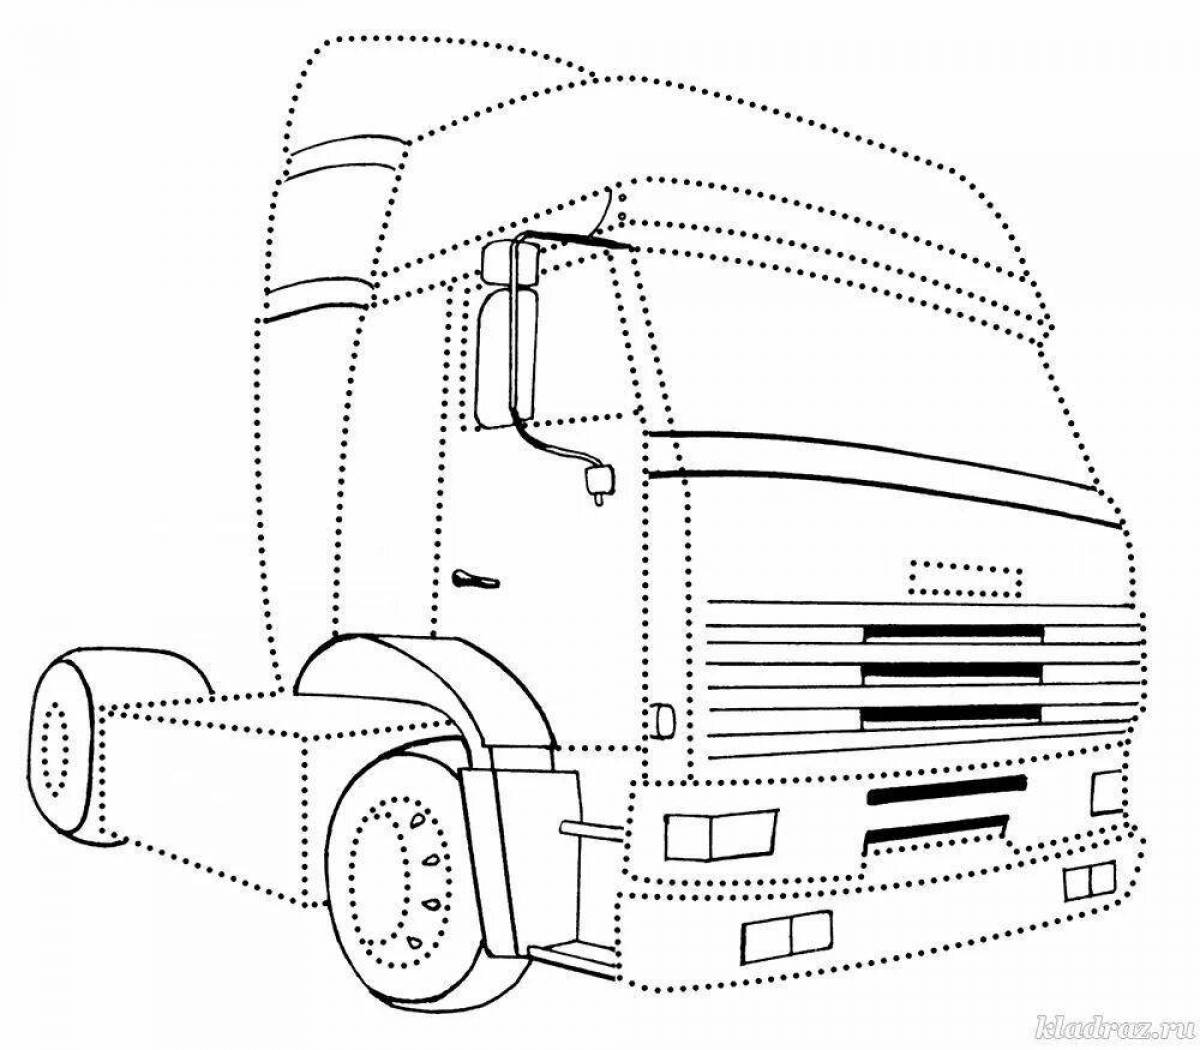 Fun machine points coloring page